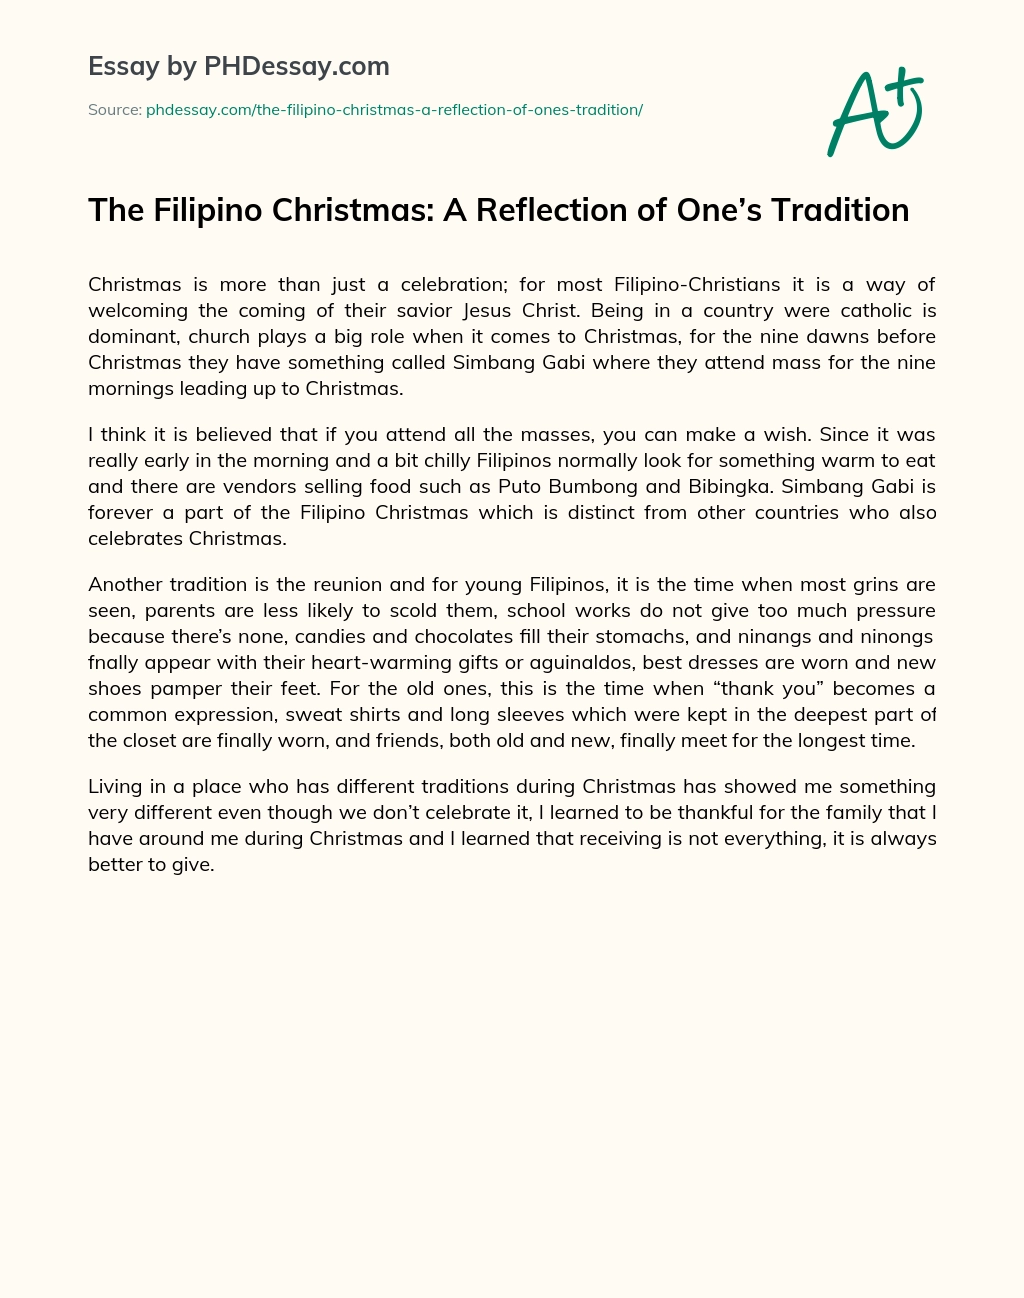 The Filipino Christmas: A Reflection of One’s Tradition essay